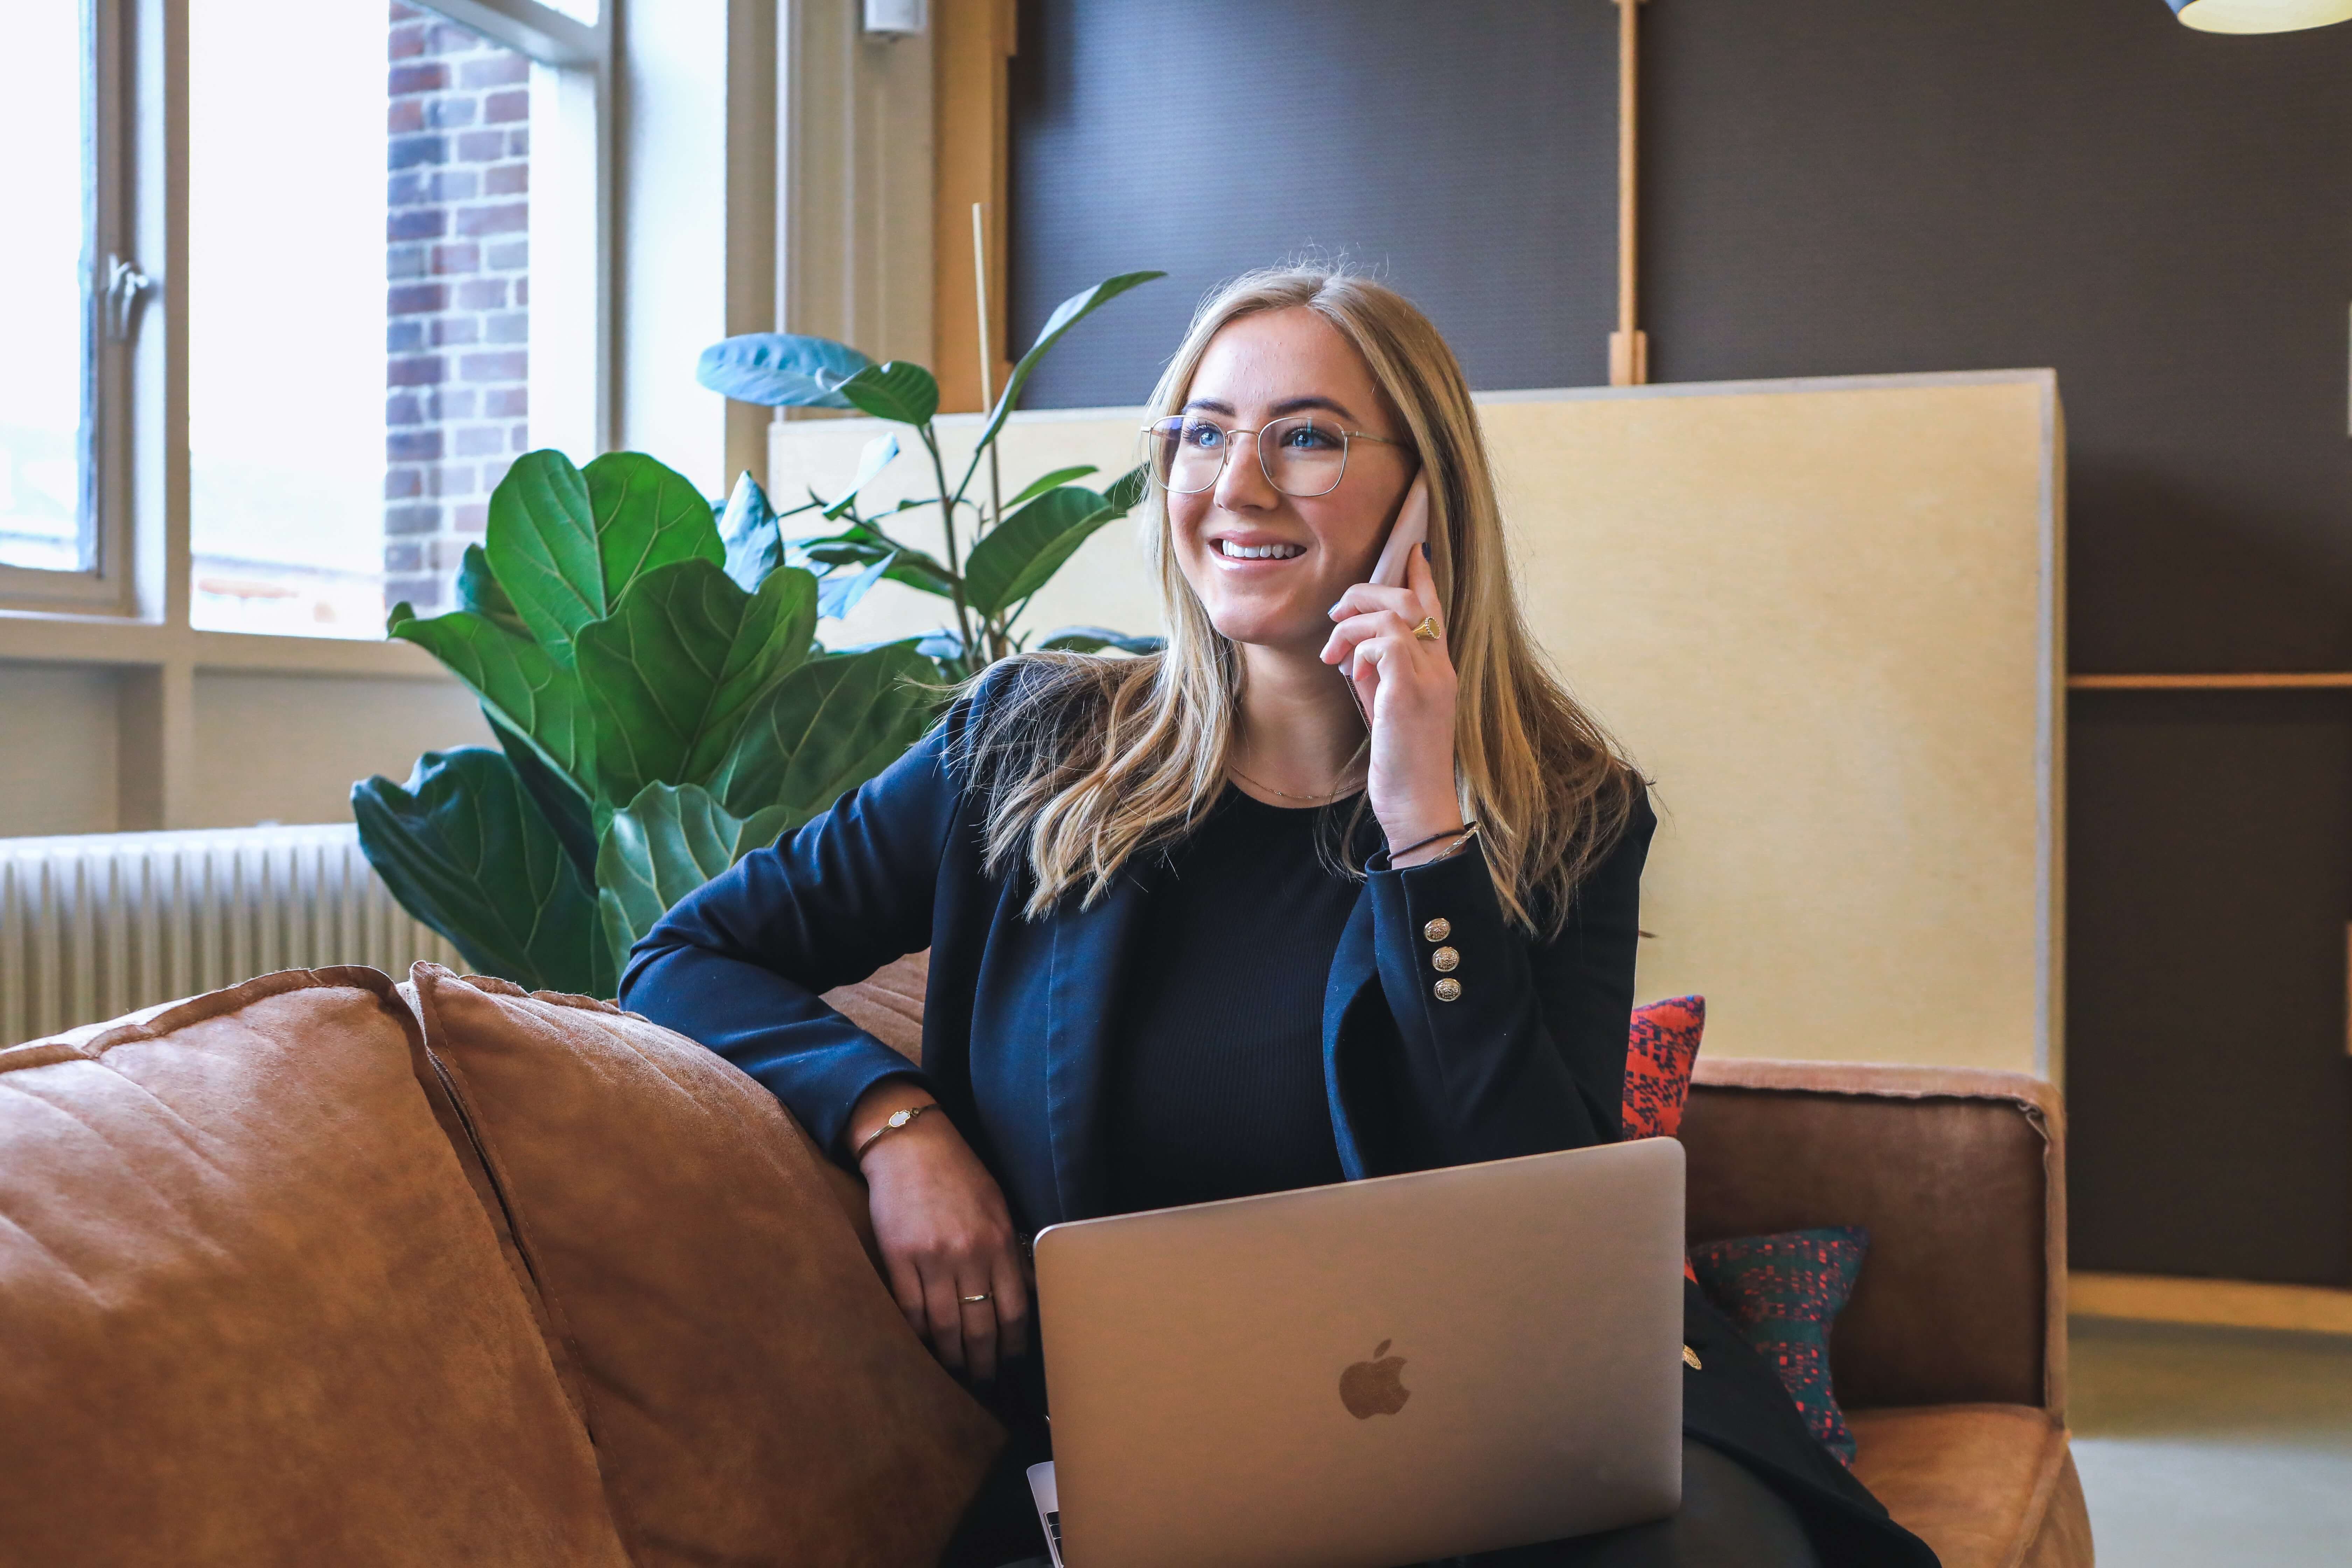 A blonde woman in professional attire talks on the phone while using a laptop